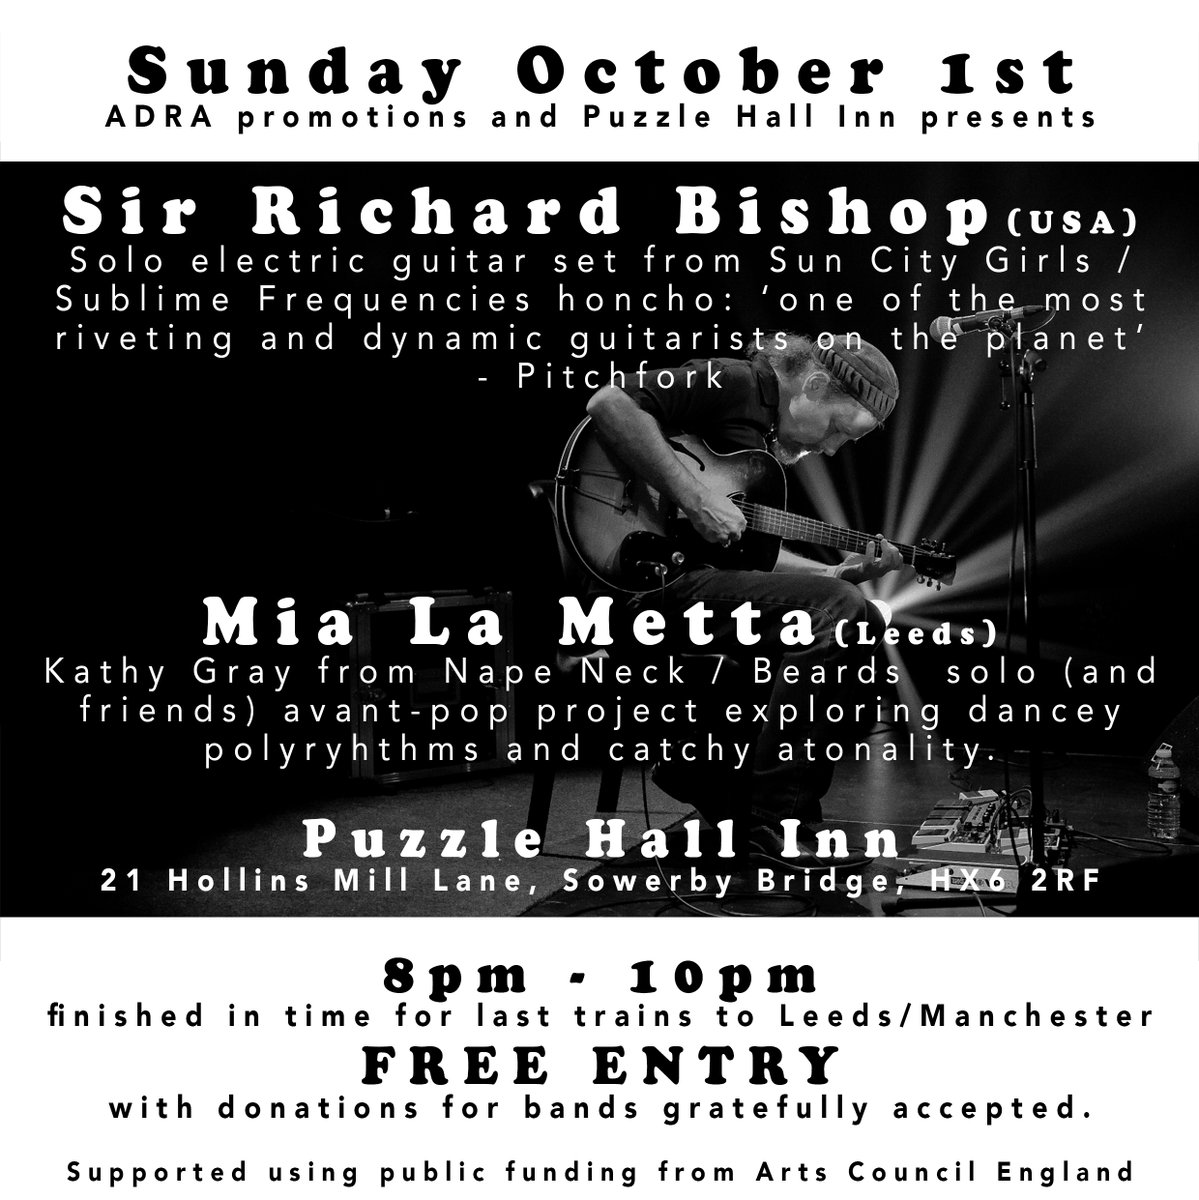 Sunday October 1st Sir Richard Bishop (USA) - Solo electric guitar set from Sun City Girls / Sublime Frequencies honcho Mia La Metta - Kathy Gray from Nape Neck / Beards solo (and friends) avant-pop project at @puzzlehallinn Sowerby Bridge 8pm - 10pm. Free / Donation entry